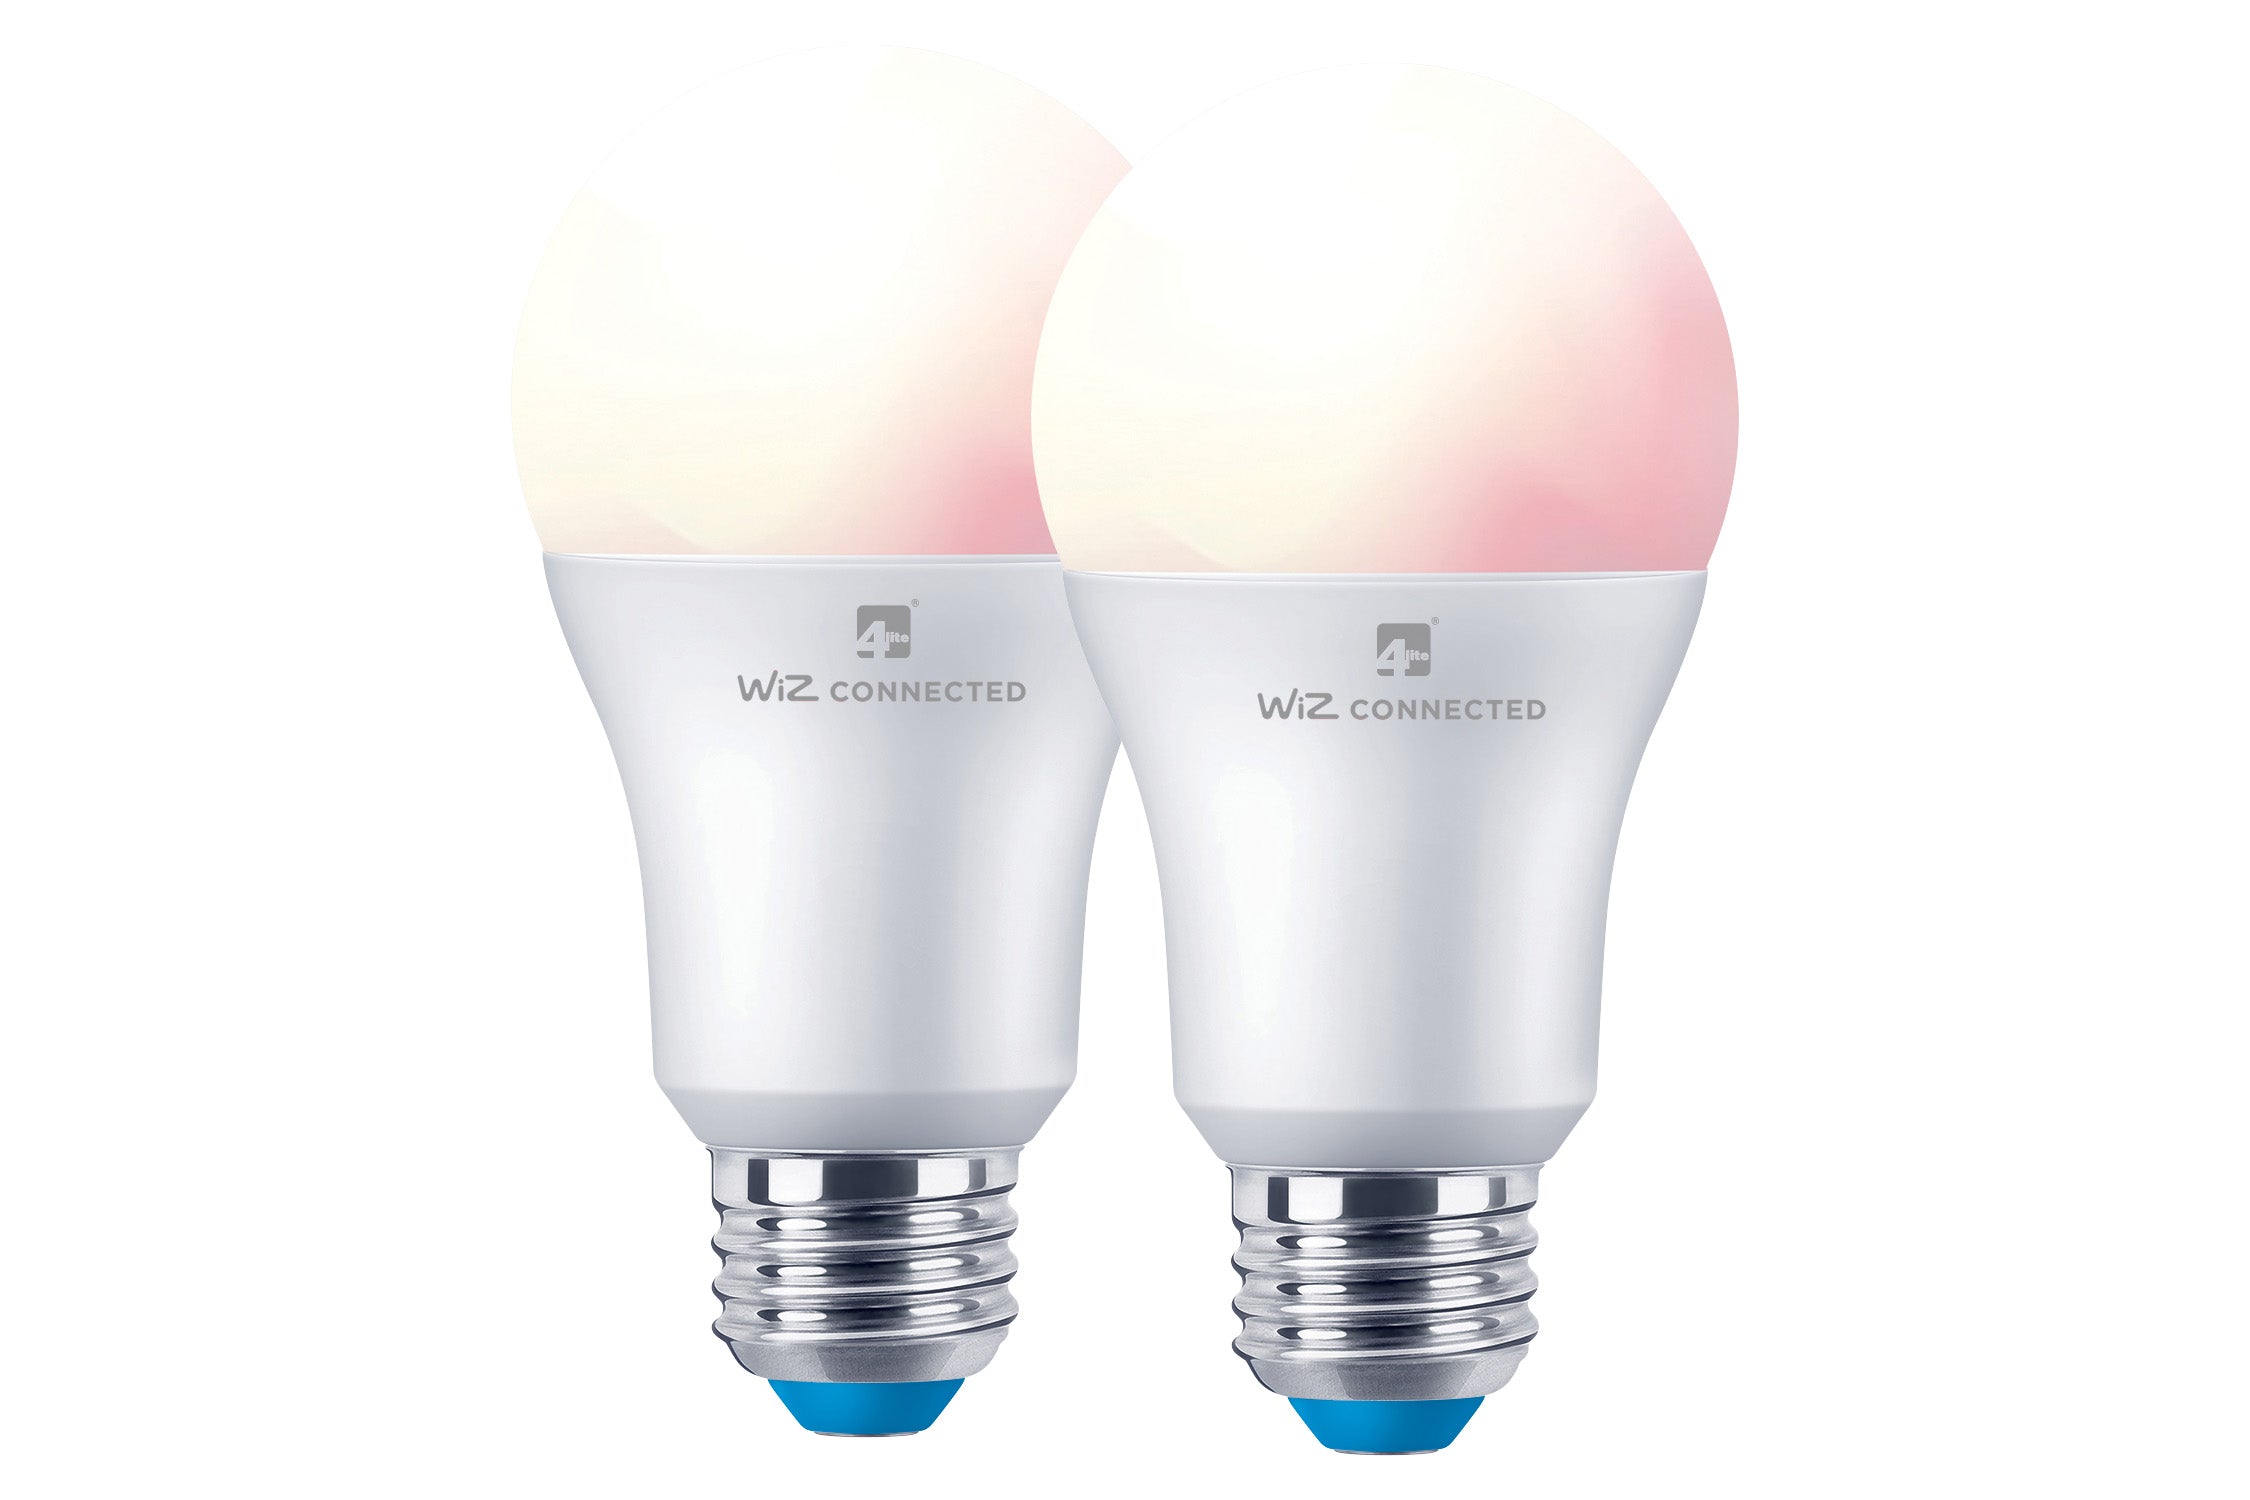 4lite WiZ Connected A60 Dimmable Multicolour WiFi LED Smart Bulb - E27 Large Screw (Pack of 2)